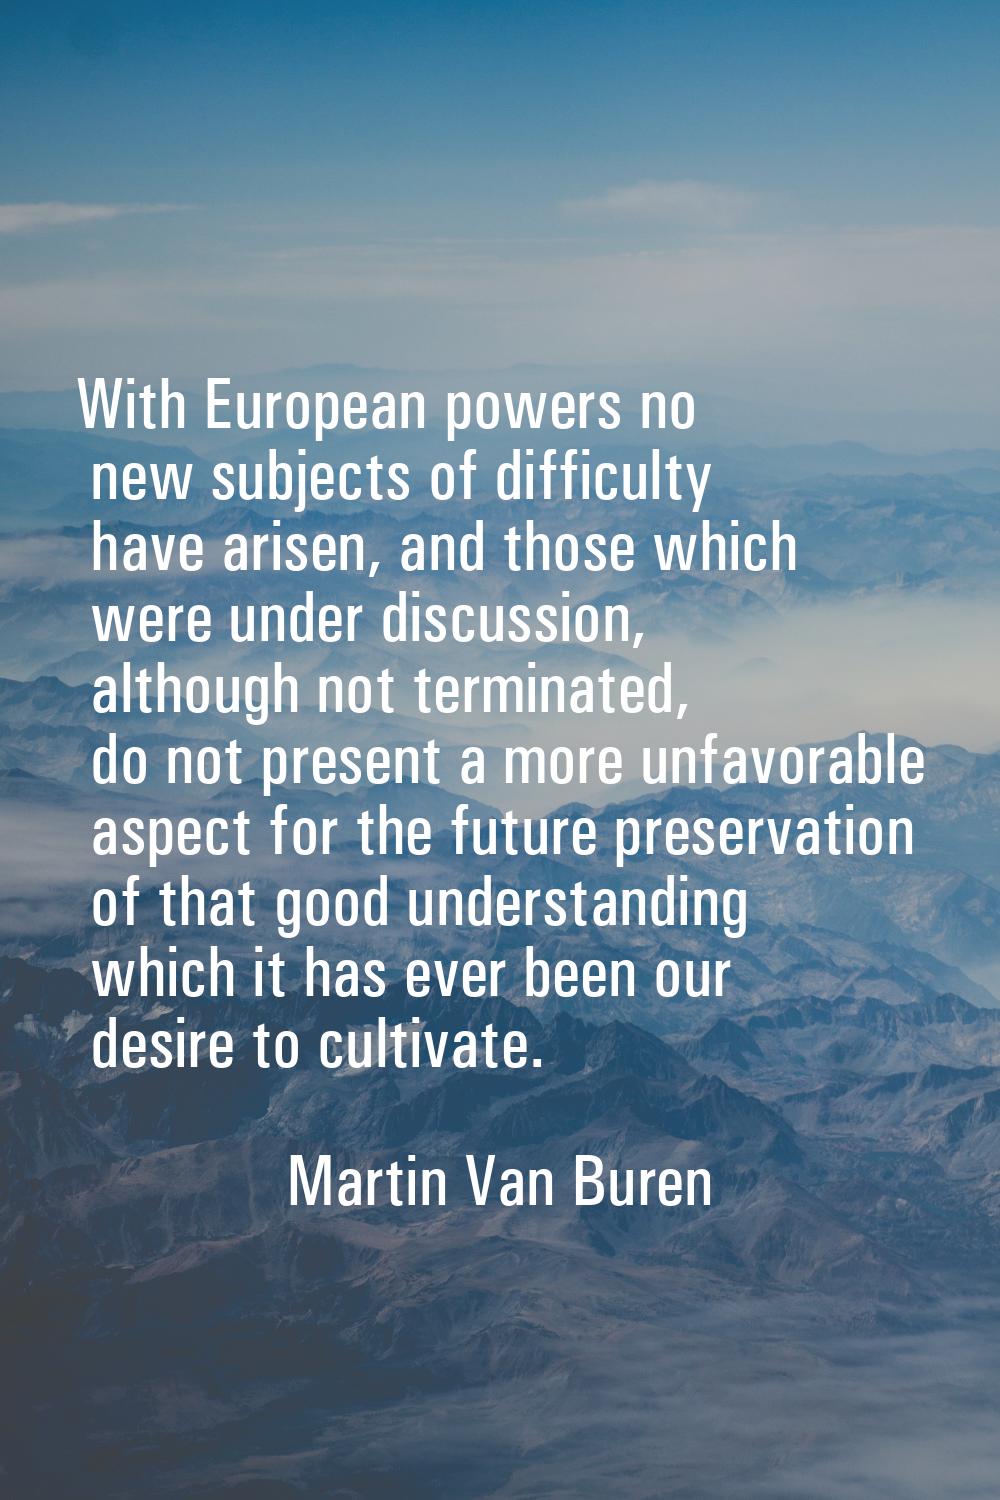 With European powers no new subjects of difficulty have arisen, and those which were under discussi